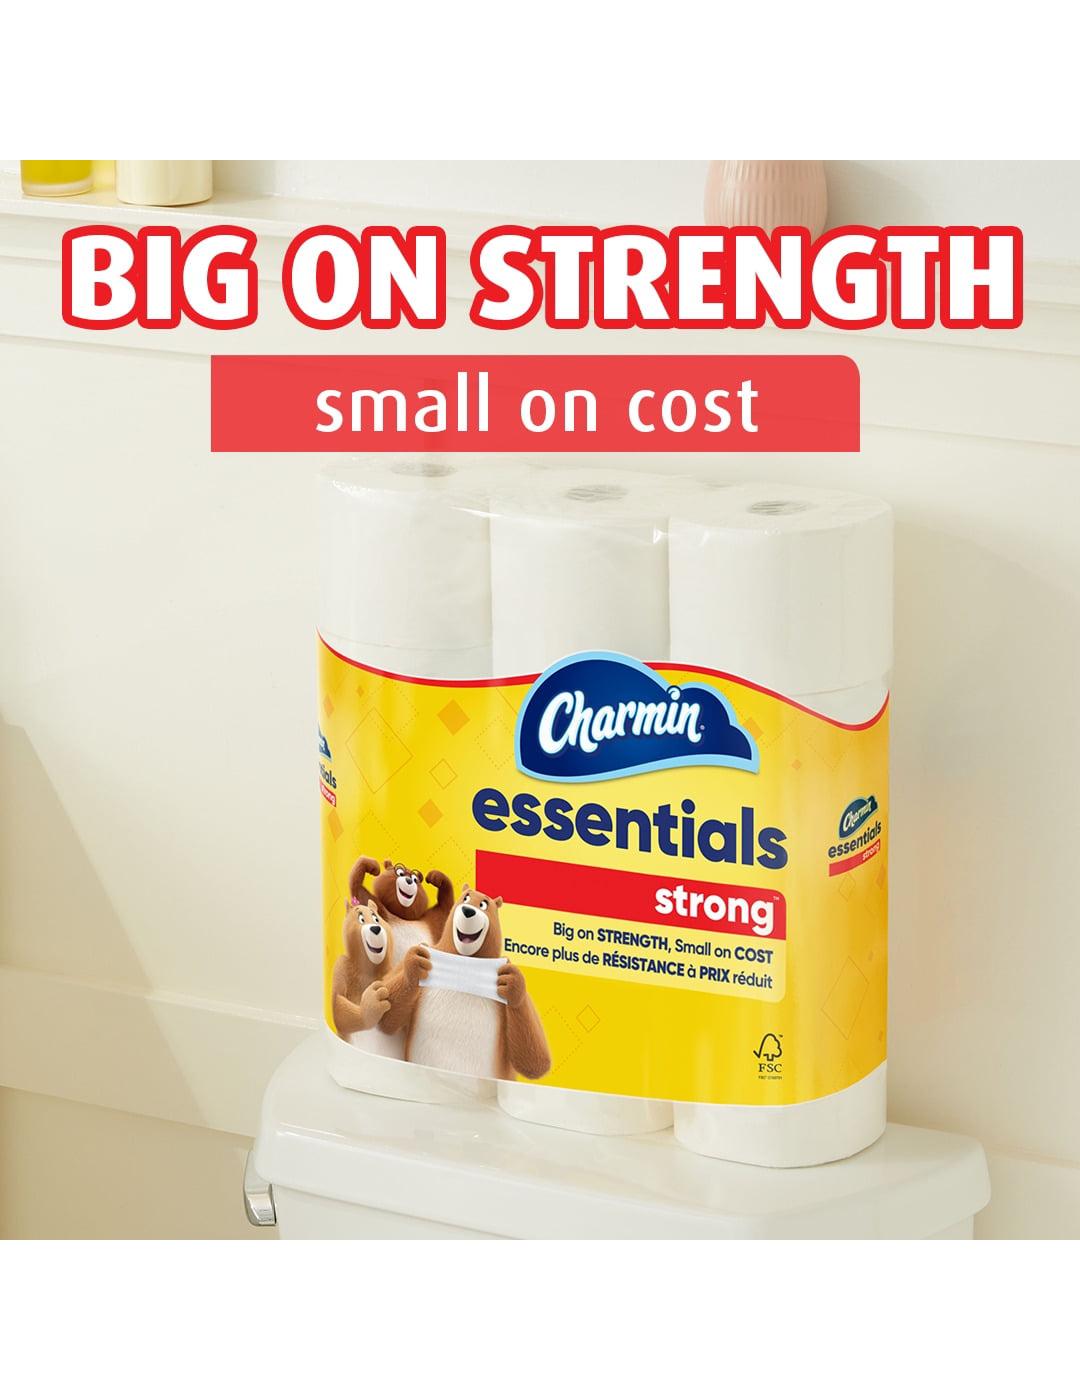 Charmin Essentials Strong Toilet Paper; image 2 of 6